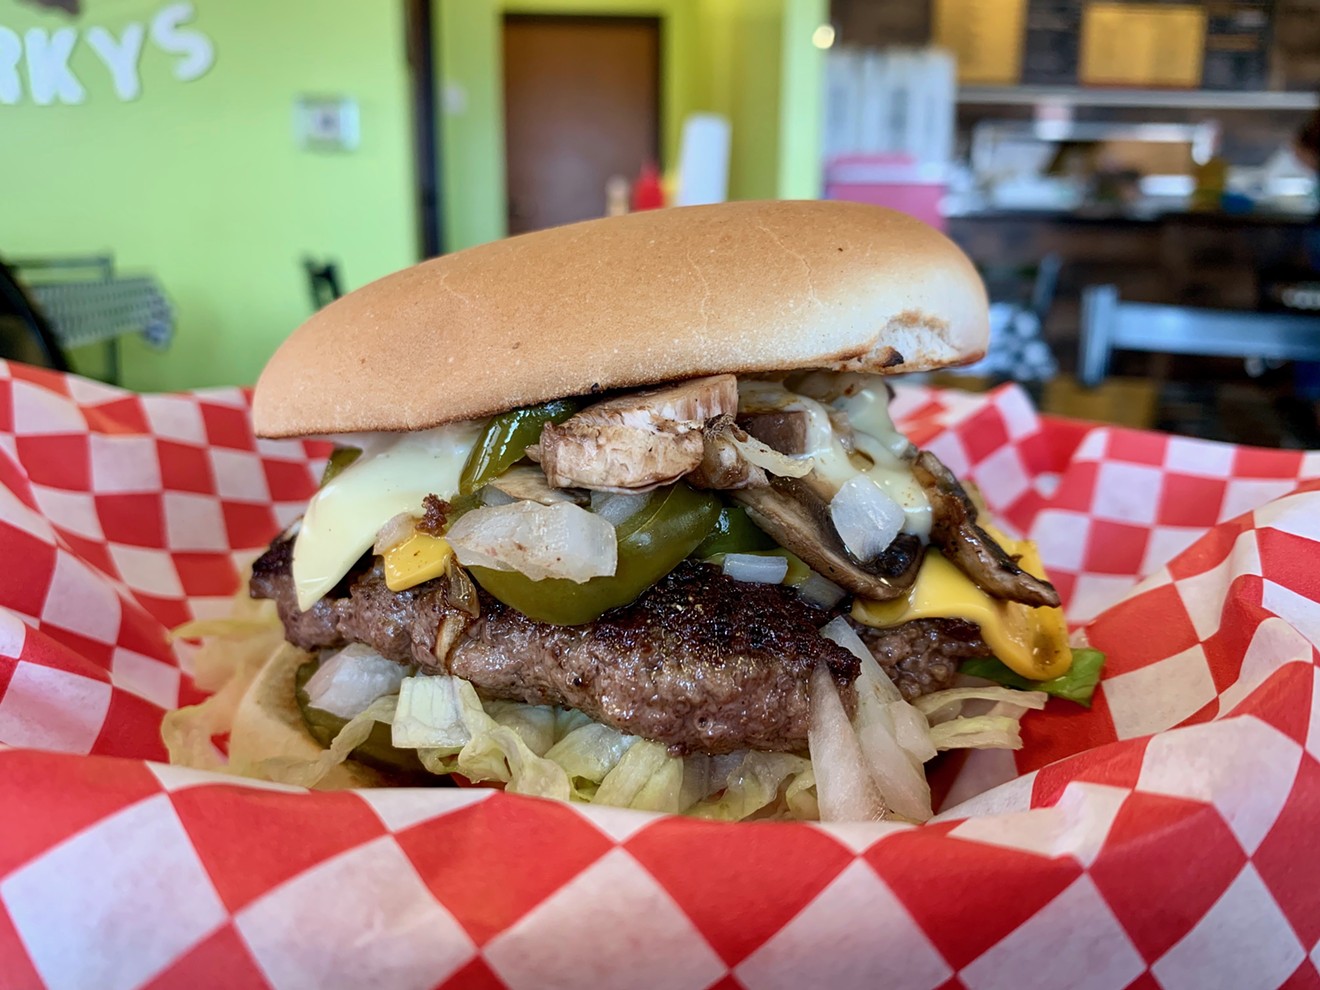 The Full Moon burger at Porky's with pickles, onions, mushrooms, jalapeños and a generous amount of American cheese.